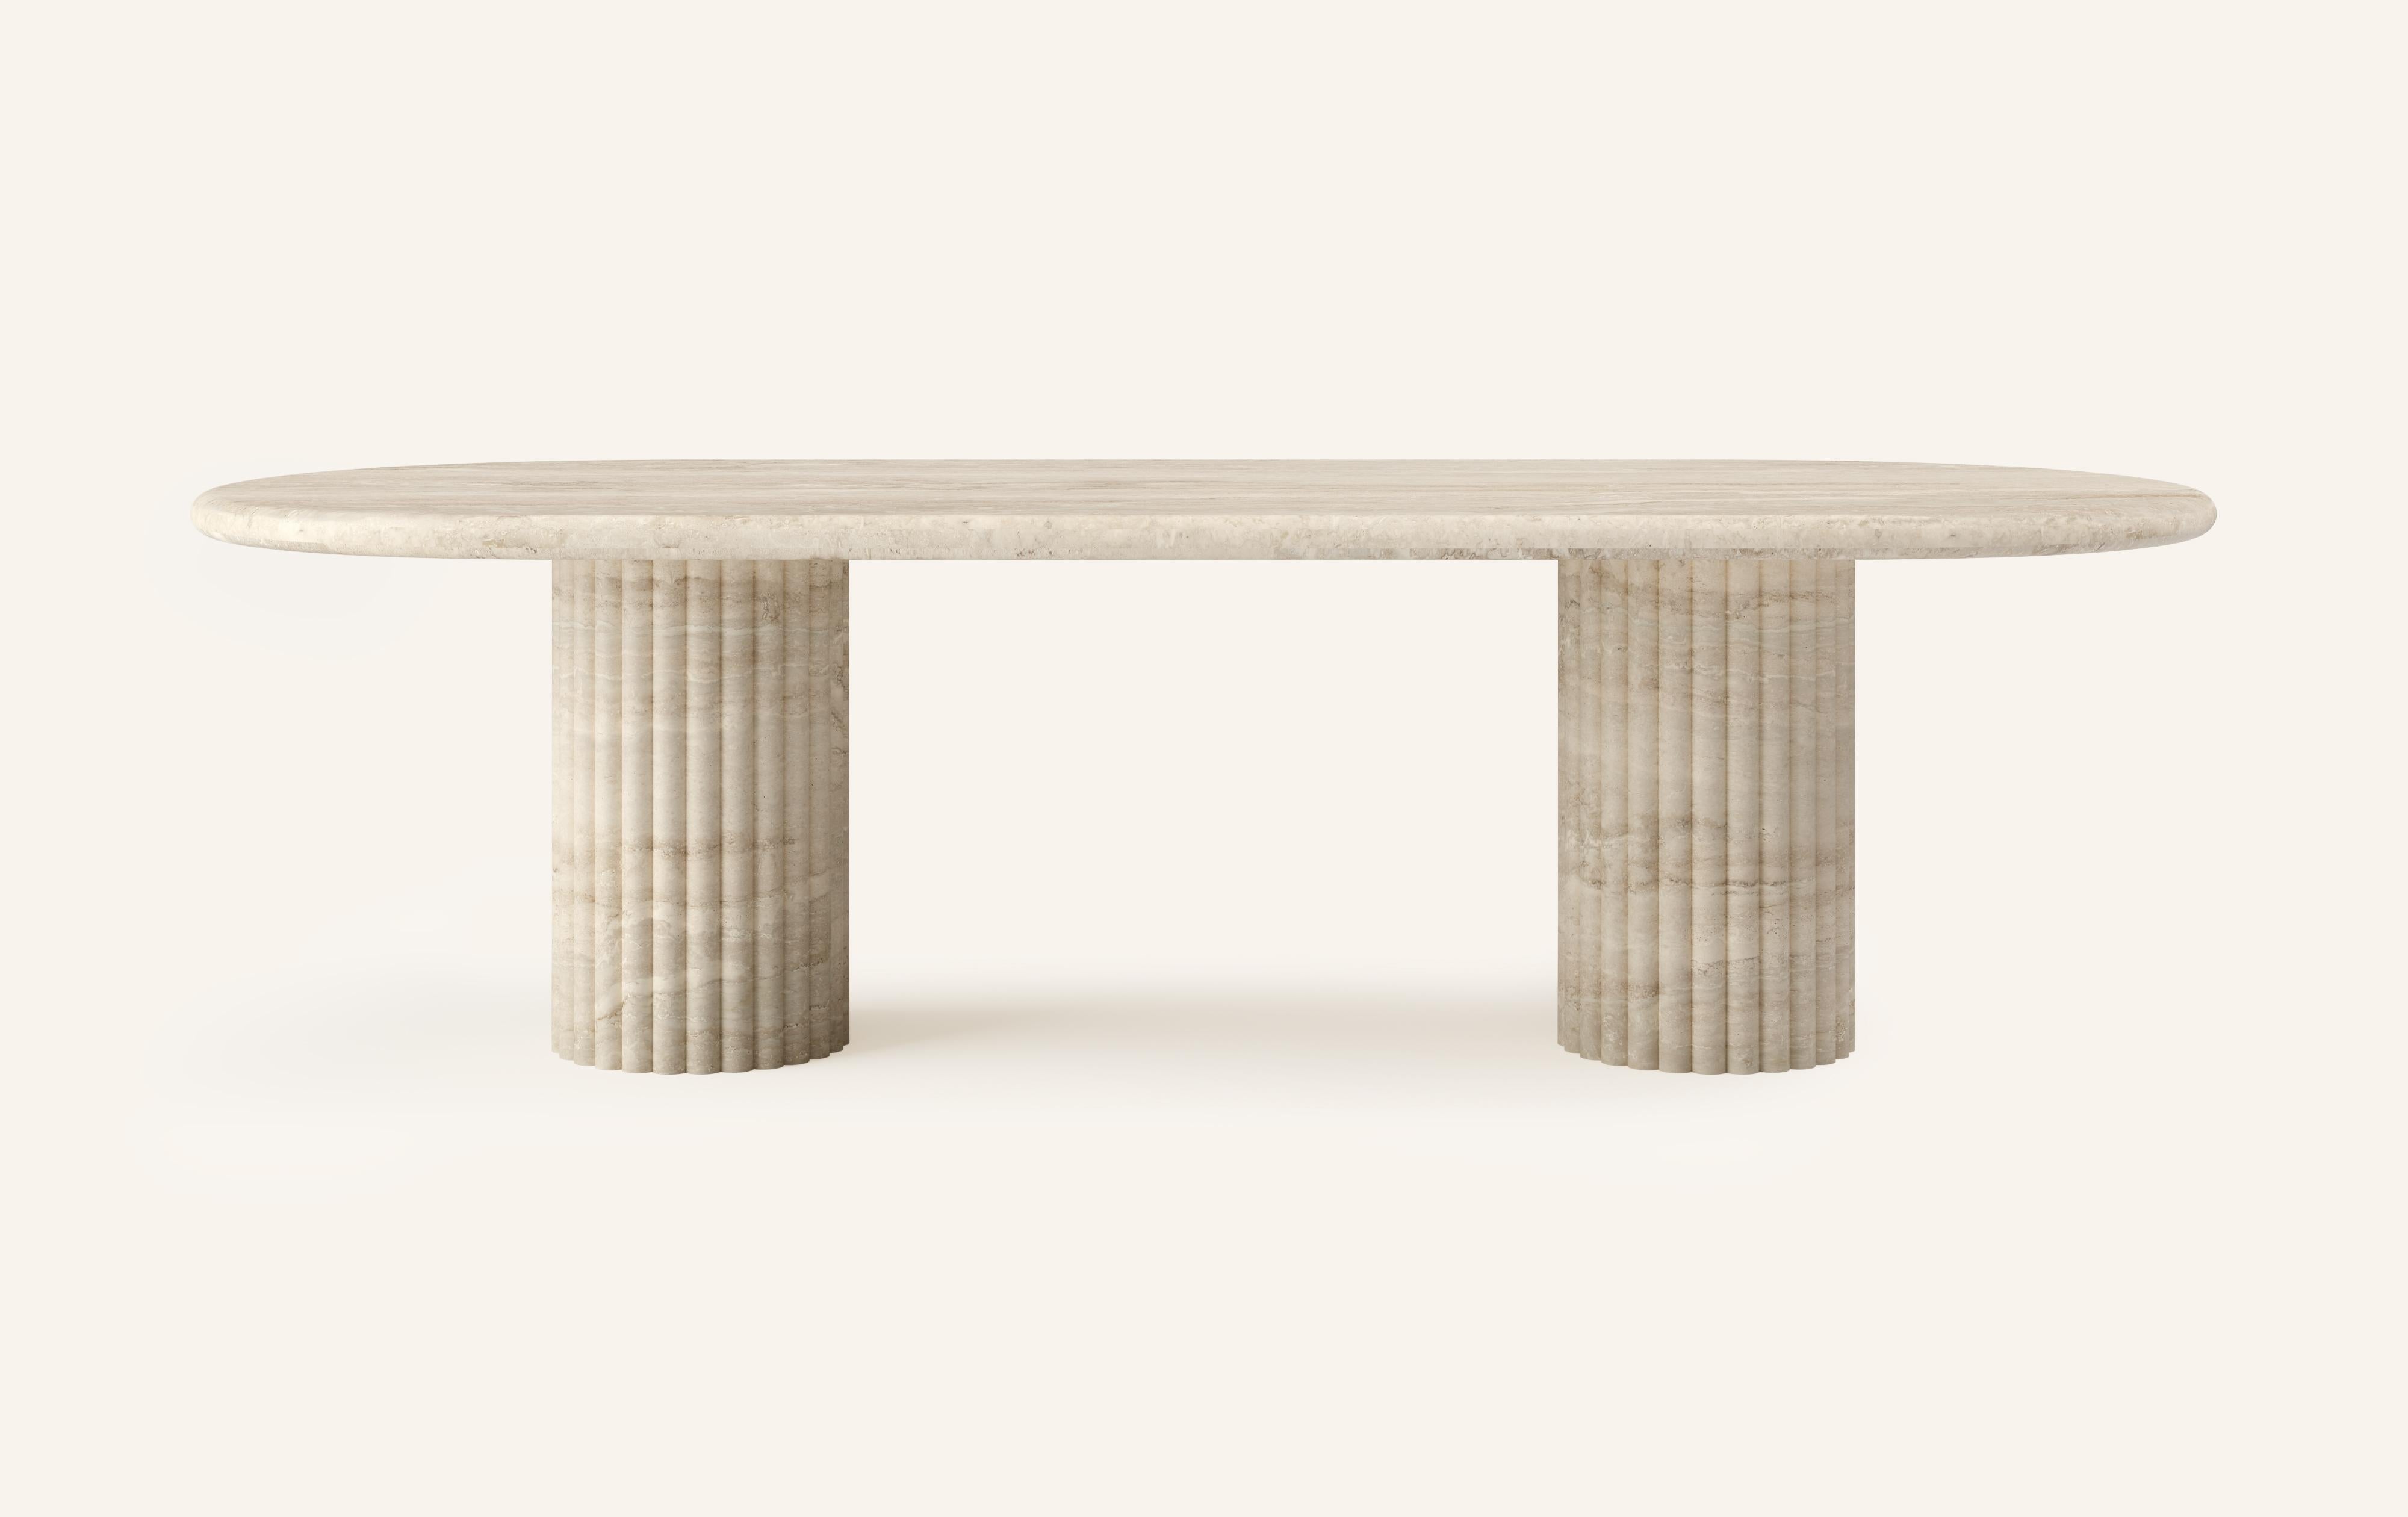 OUR MOST COVETED COLLECTION AND MODERN TWIST ON AN ANCIENT ROMAN CLASSIC. RECENTLY REFRESHED WITH A MORE PLAYFUL AND ROBUST PROFILE.

DIMENSIONS:
84”L x 42”W x 30”H: 
- 2.25